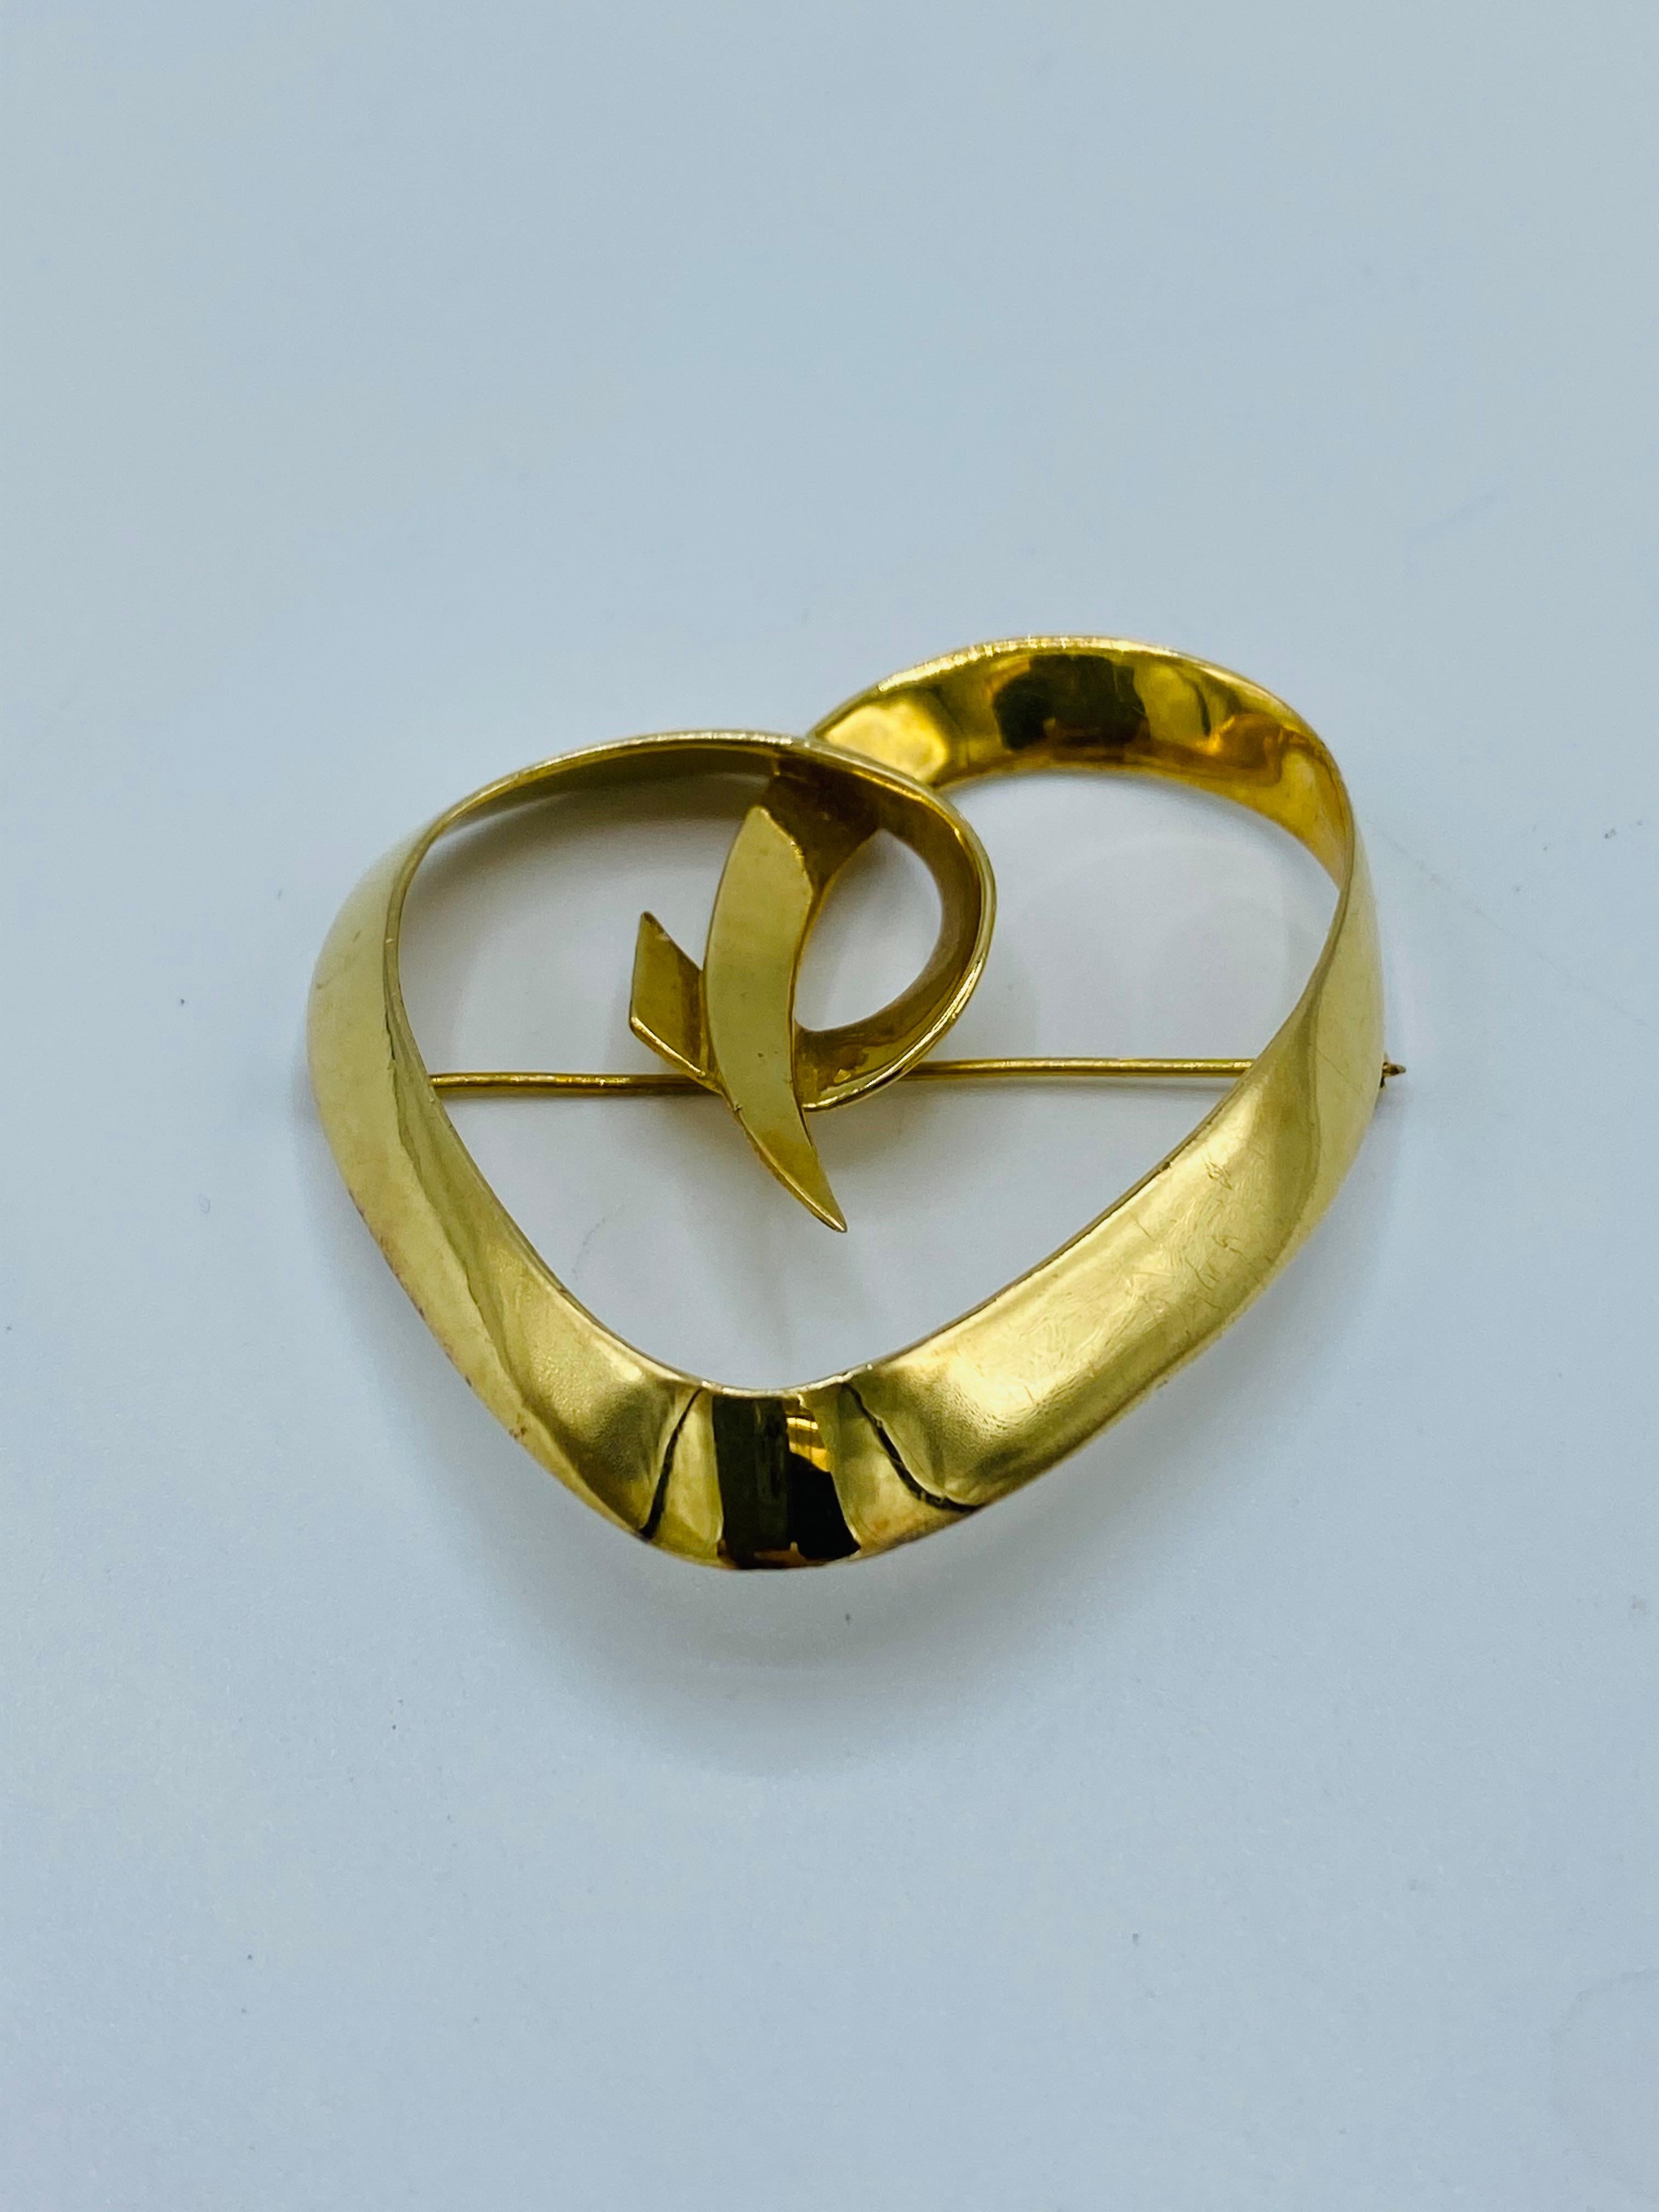 Product details:

The brooch was designed by Paloma Picasso for Tiffany and Company in 1983. It is made out of 18K yellow gold in a heart shape. 
It is signed Tiffany & Co. Paloma Picasso, dated 1983 and stamped 18K.
Must have for collectors and it